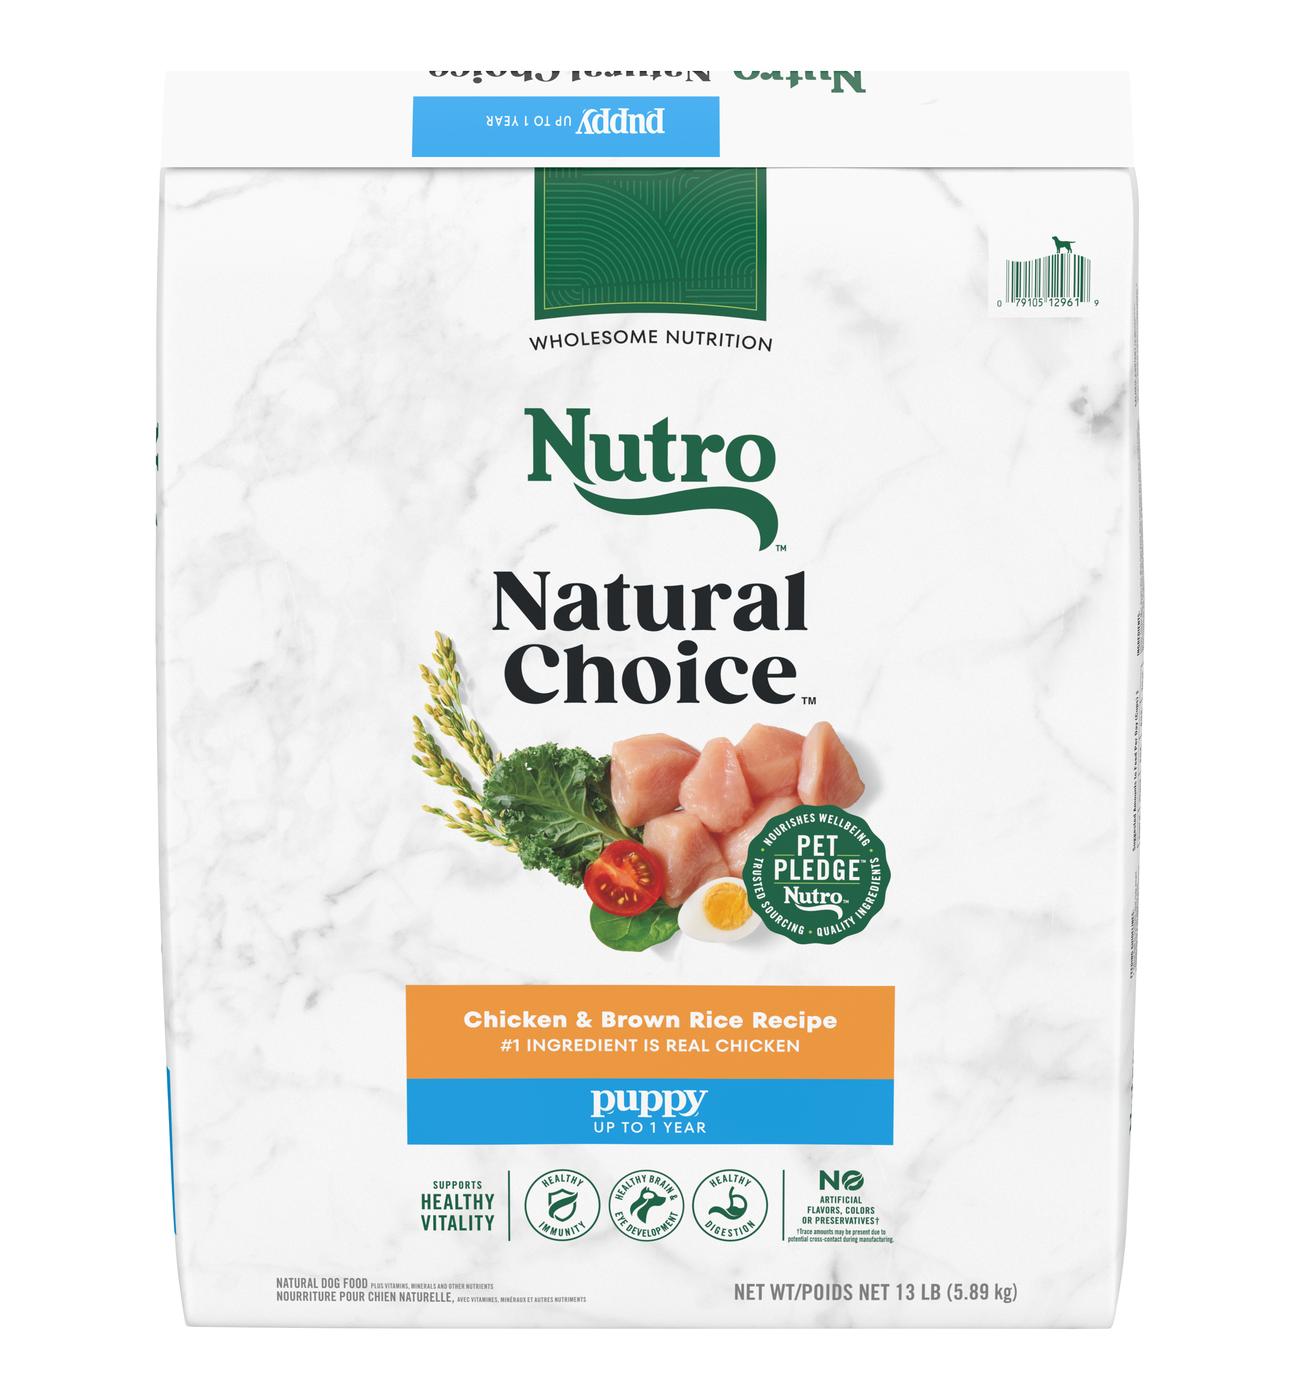 Nutro Natural Choice Puppy Chicken & Brown Rice Dry Dog Food; image 1 of 5